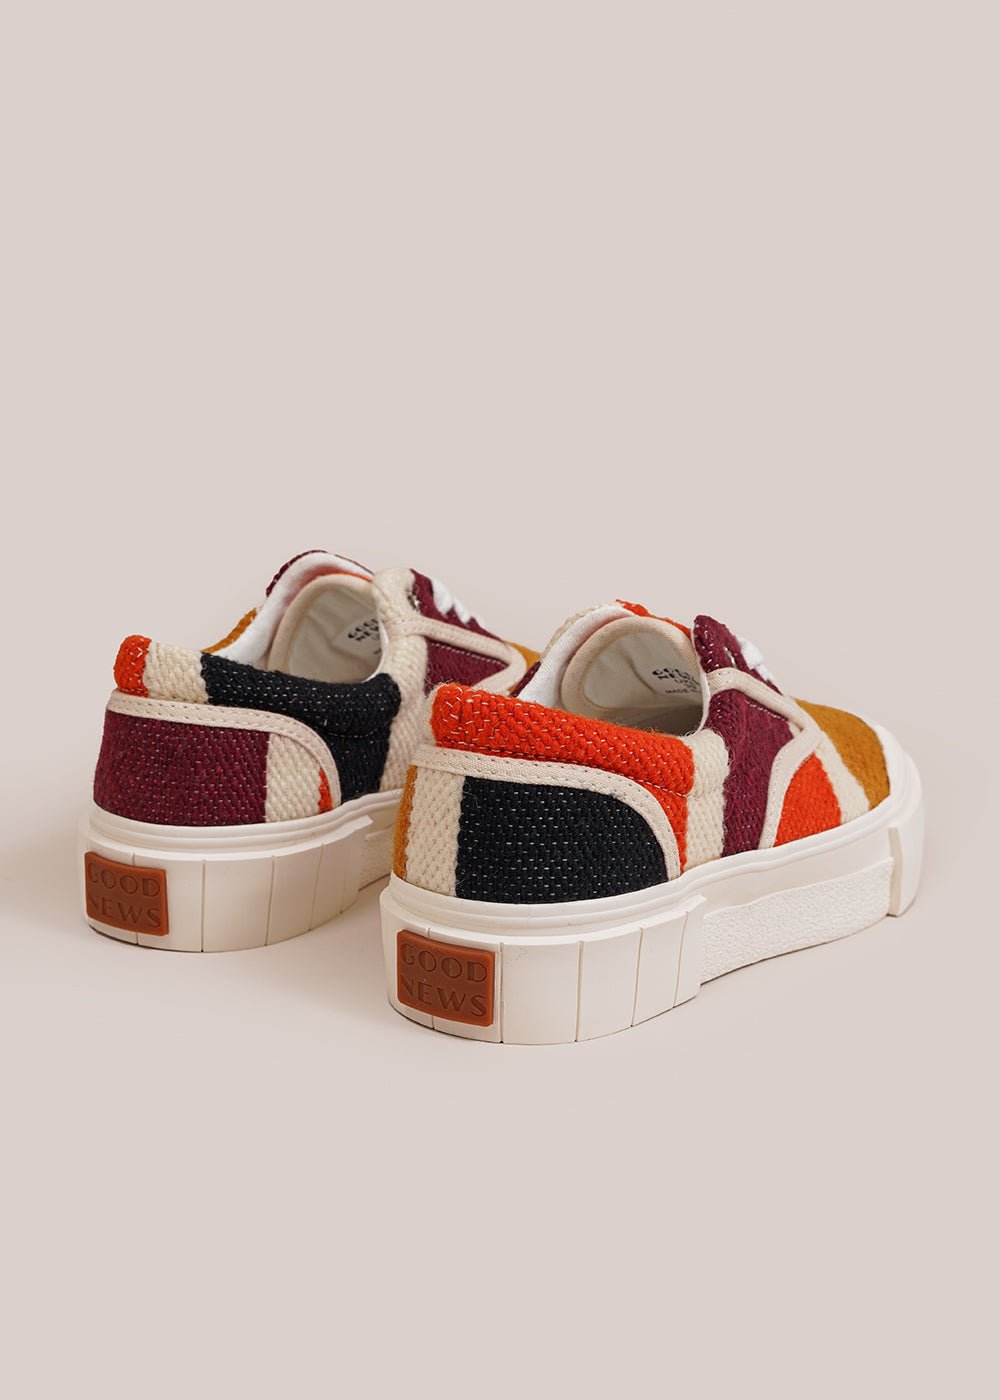 GOOD NEWS Opal Moroccan Sneaker - New Classics Studios Sustainable Ethical Fashion Canada